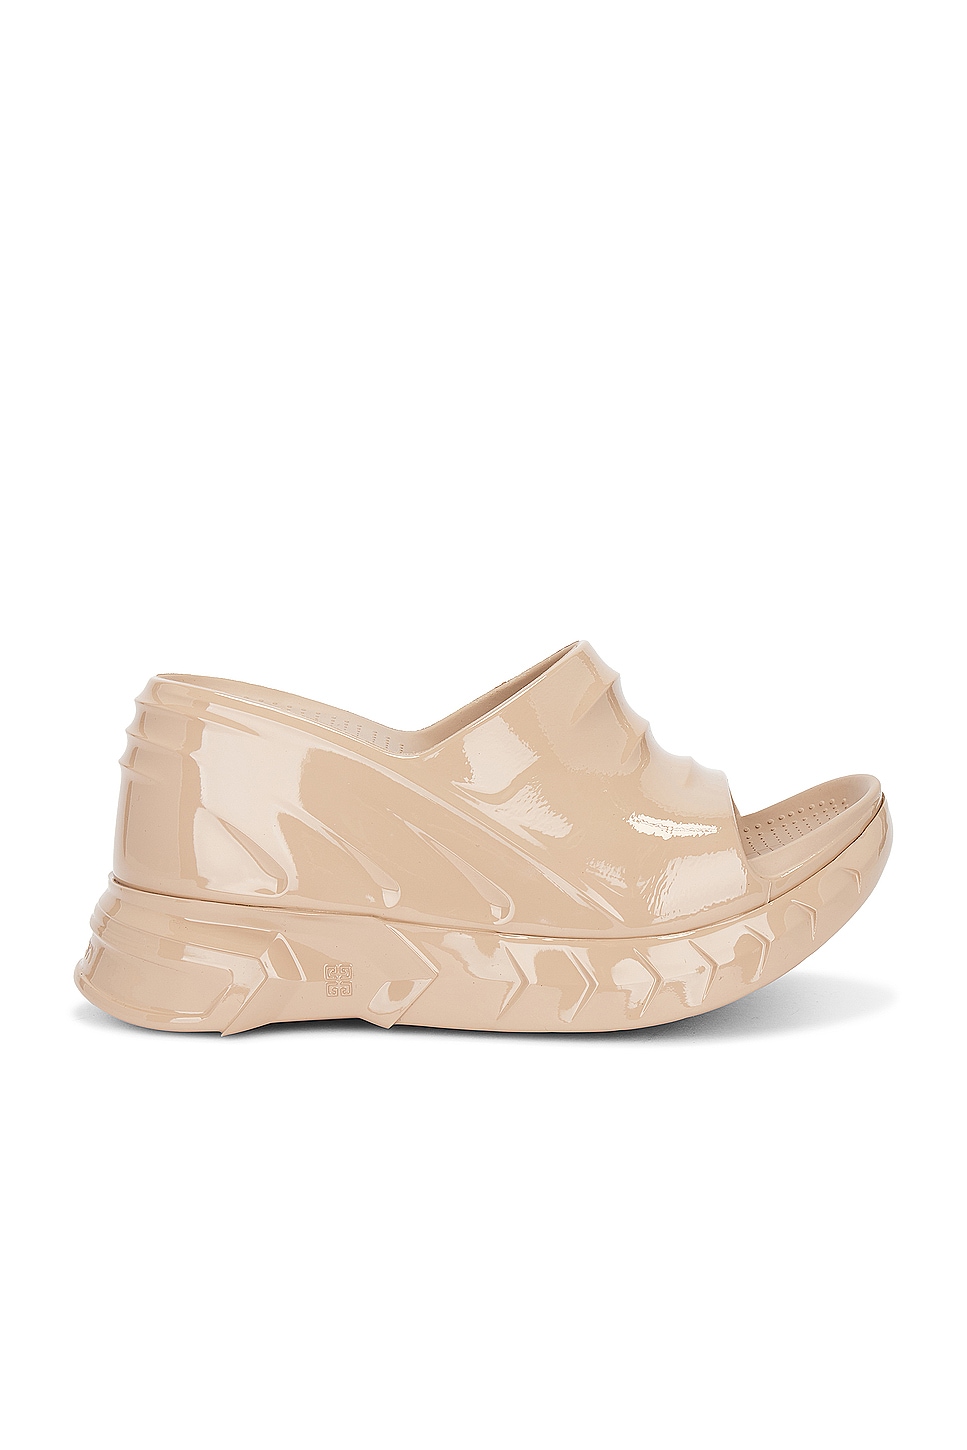 Image 1 of Givenchy Marshmallow Wedge Sandal in Nude